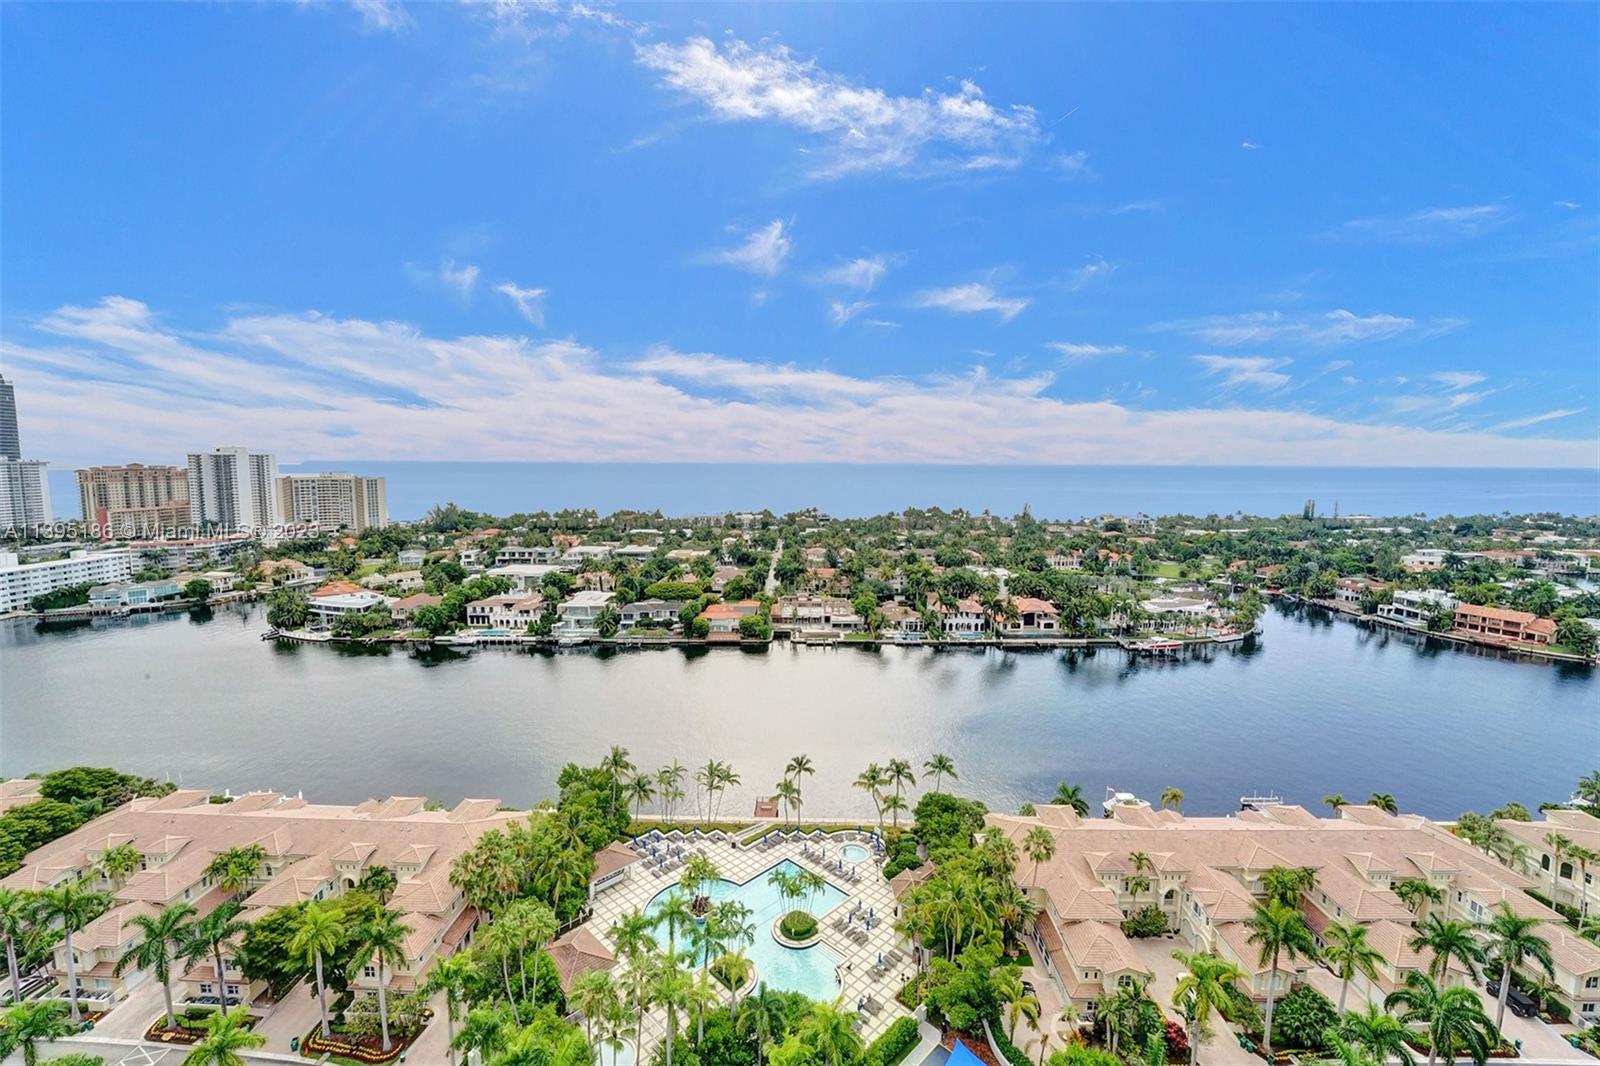 Welcome to this exquisite 3-bedroom, 3-and-a-half-bathroom residence in the highly sought-after Aventura neighborhood. Offering unparalleled views of the mesmerizing intracoastal waterway and the sparkling ocean, this property promises an extraordinary living experience.
Beyond the walls of this exceptional unit, the building offers resort-style amenities that cater to every lifestyle. Stay fit and active in the state-of-the-art gym, unwind and rejuvenate in the spa, or challenge friends to a game of tennis on the courts. The three swimming pools invite you to soak up the sun while enjoying the beautiful surroundings. Overall, this property offers an unparalleled living experience with its outstanding views, luxurious amenities, and prime location.